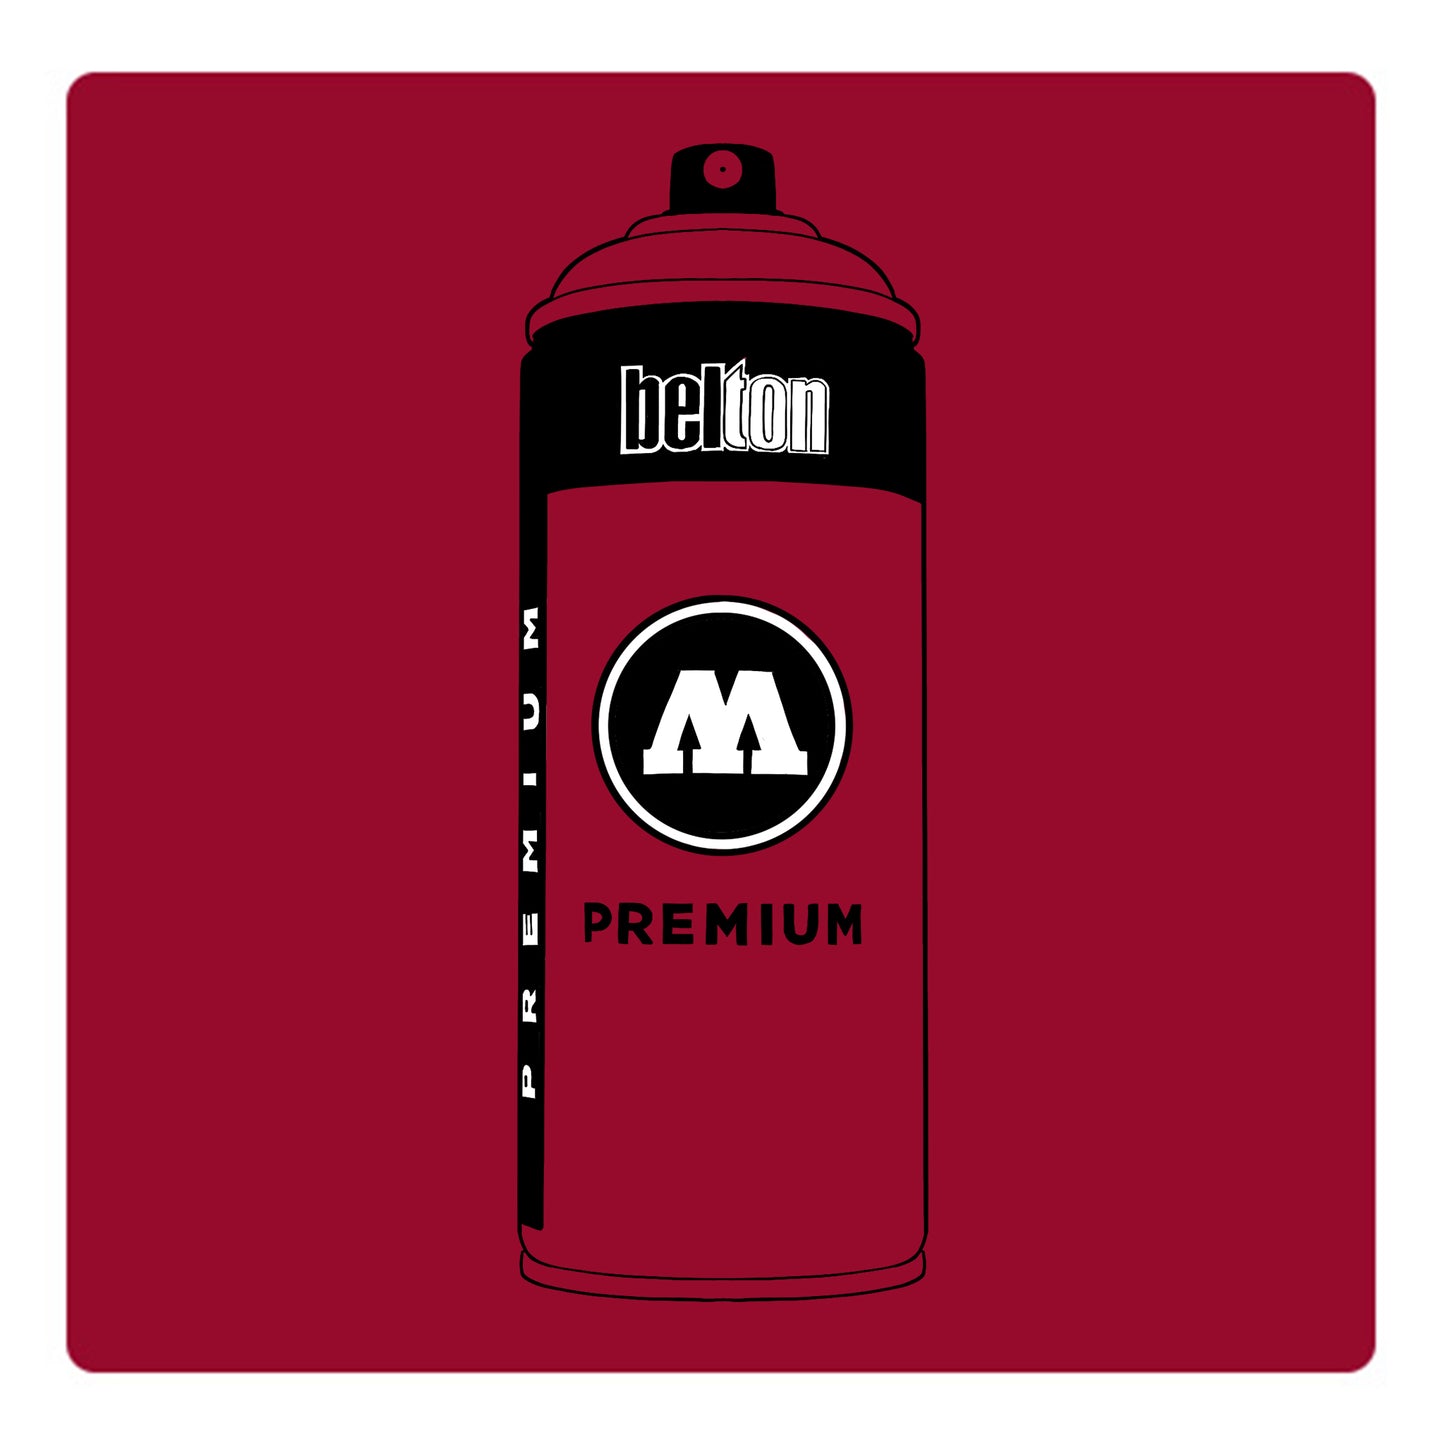 A black outline drawing of a berry red spray paint can with the words "belton","premium" and the letter"M" written on the face in black and white font. The background is a color swatch of the same berry red with a white border.